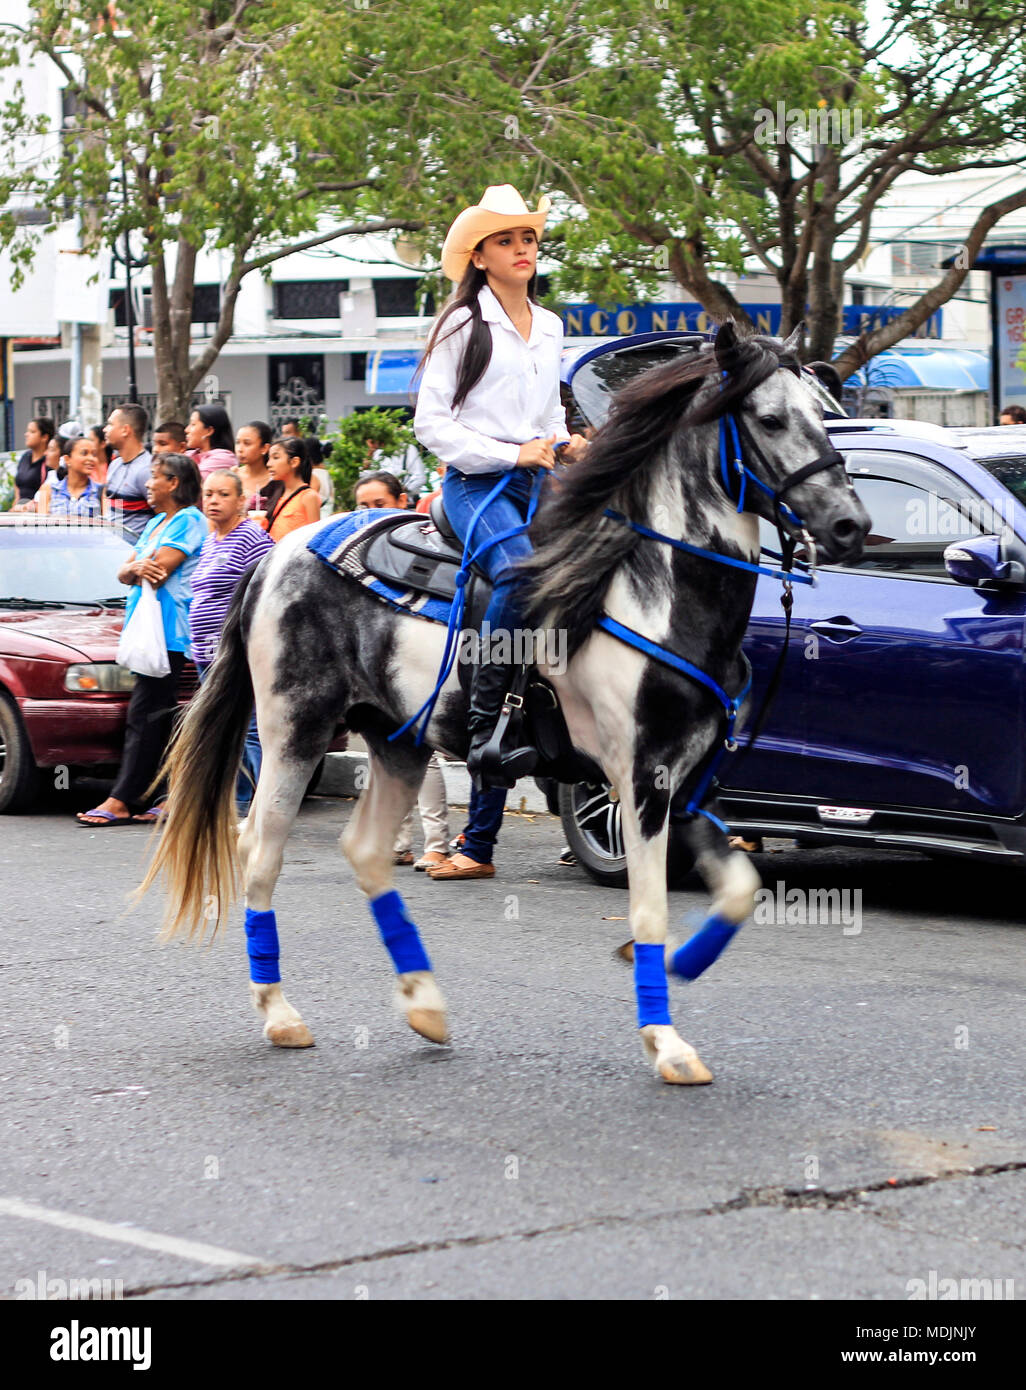 A young woman rides her horse through the streets of David, Panama, in the  annual Cabalgata de David, the equestrian festival of David Stock Photo -  Alamy